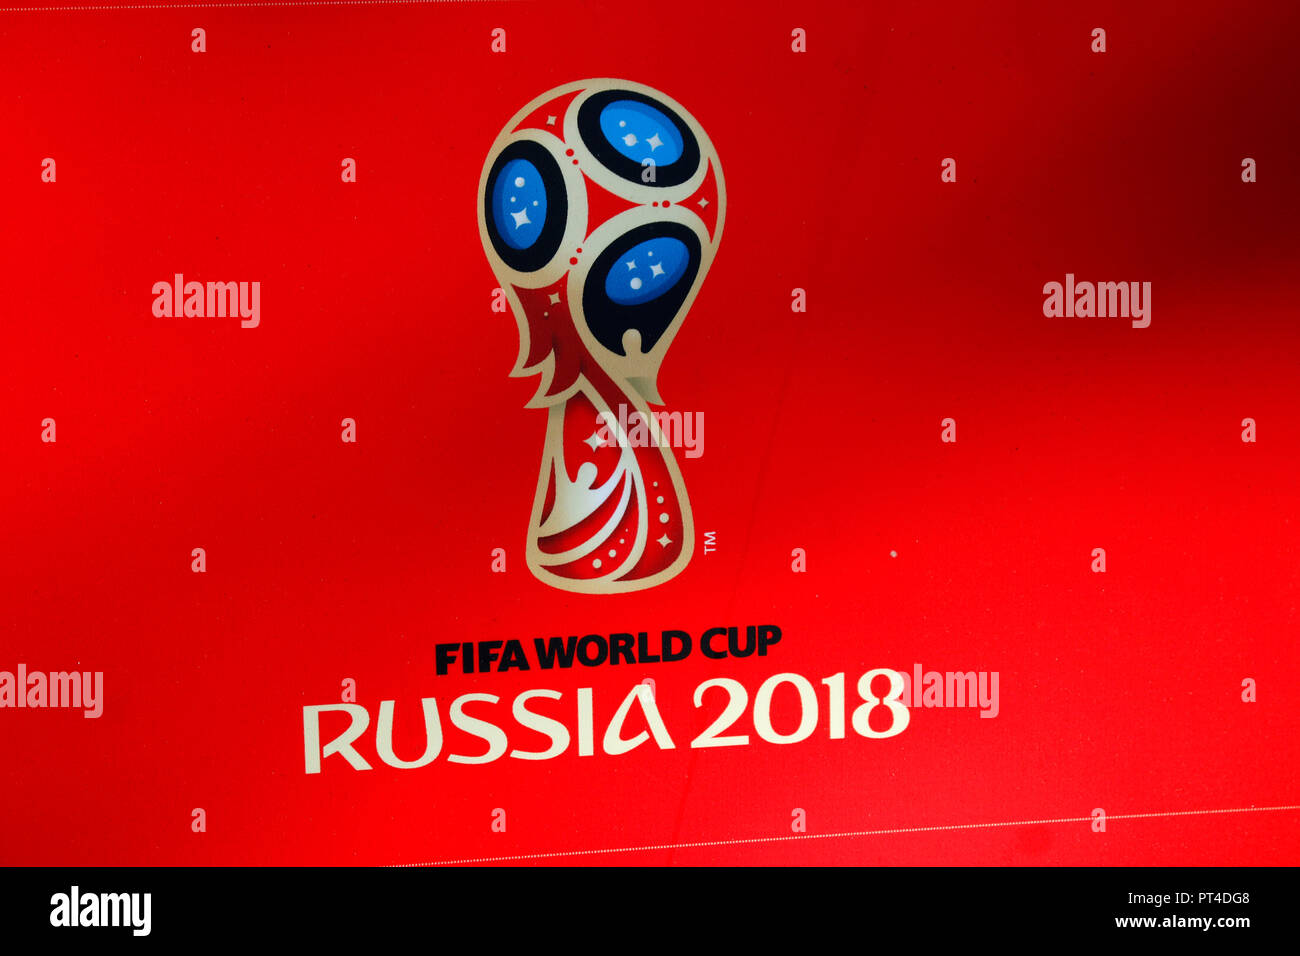 Fifa logo Stock Vector Images - Alamy